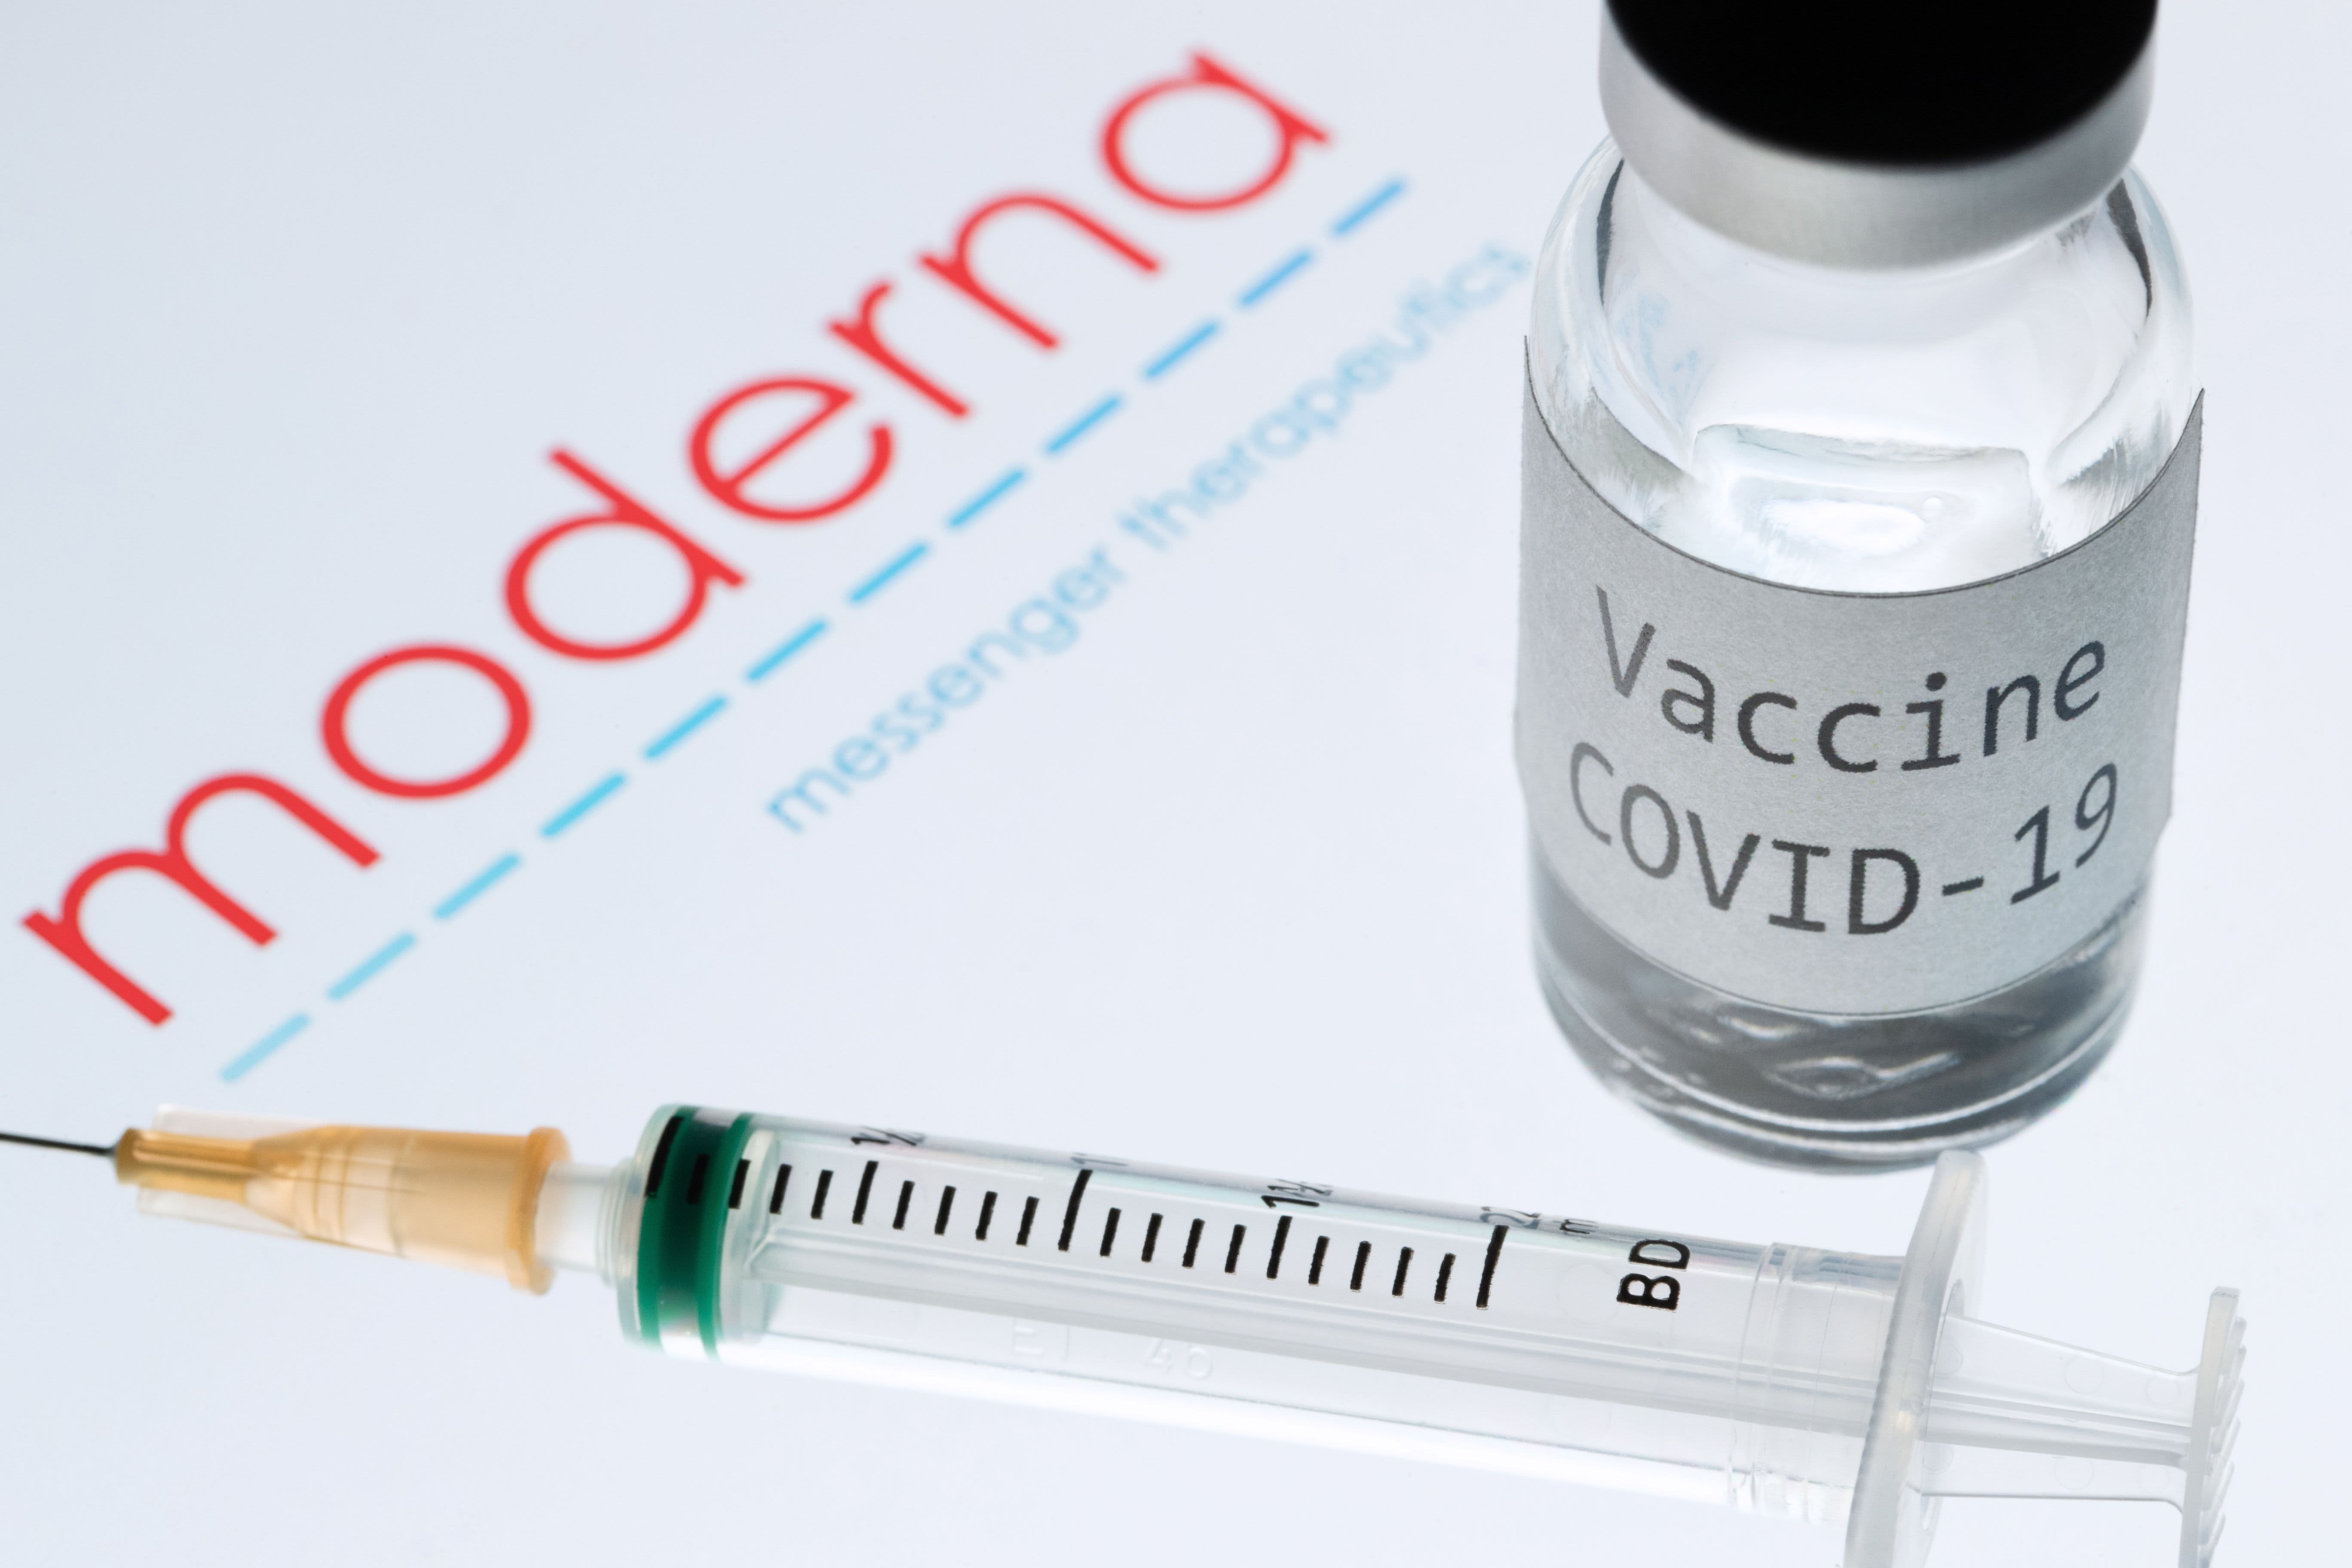 WHO panel to issue recommendations on Moderna vaccine next week - CNBC